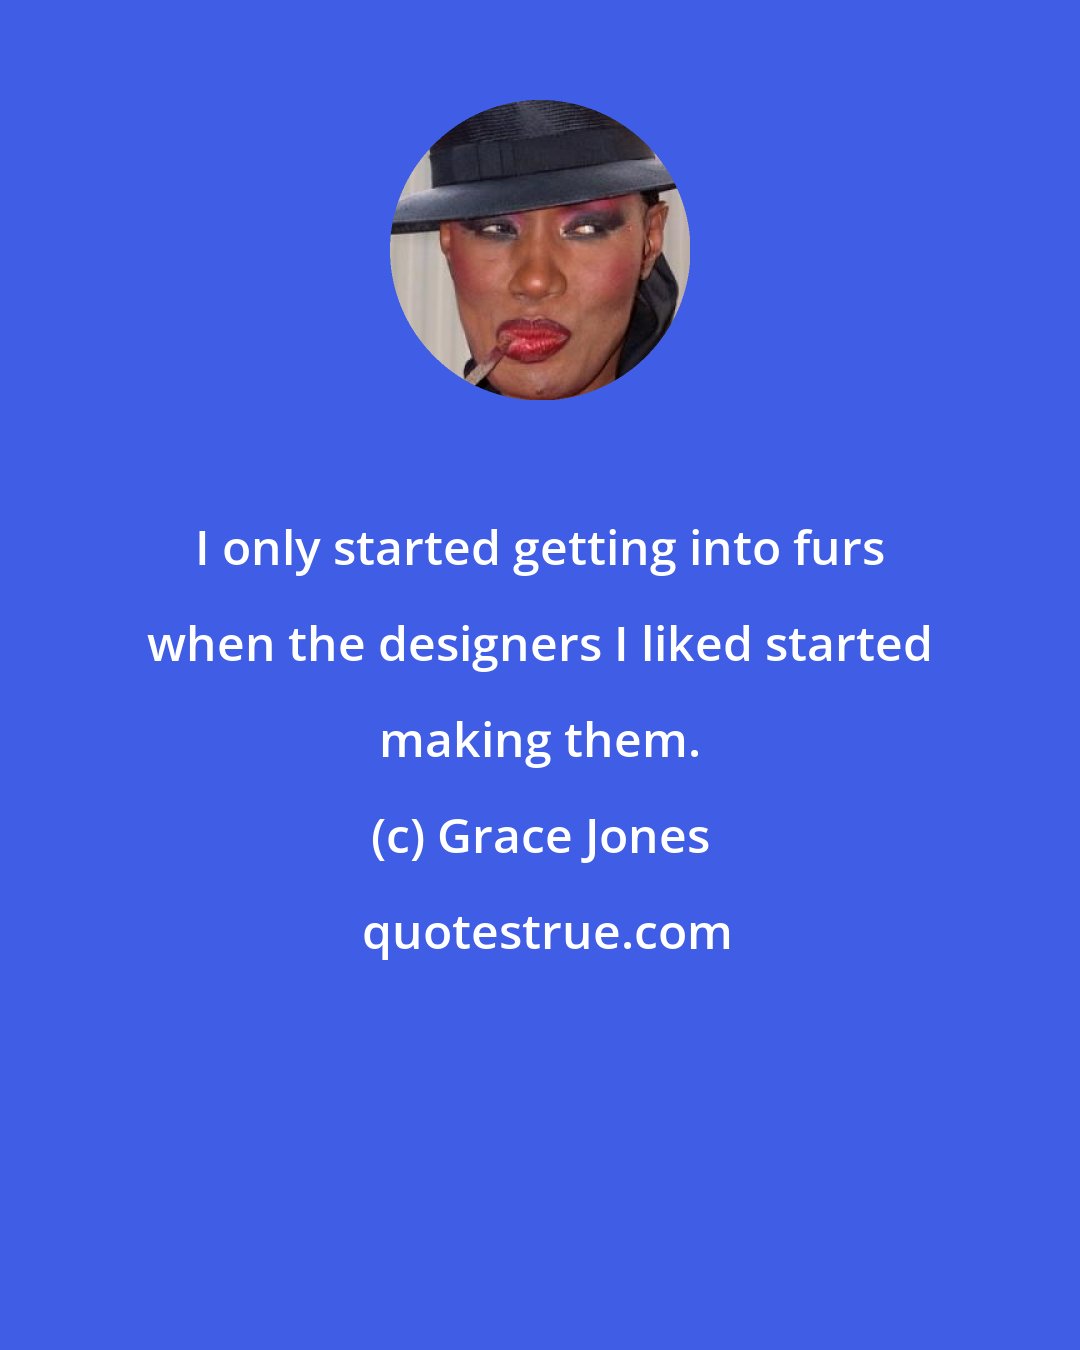 Grace Jones: I only started getting into furs when the designers I liked started making them.